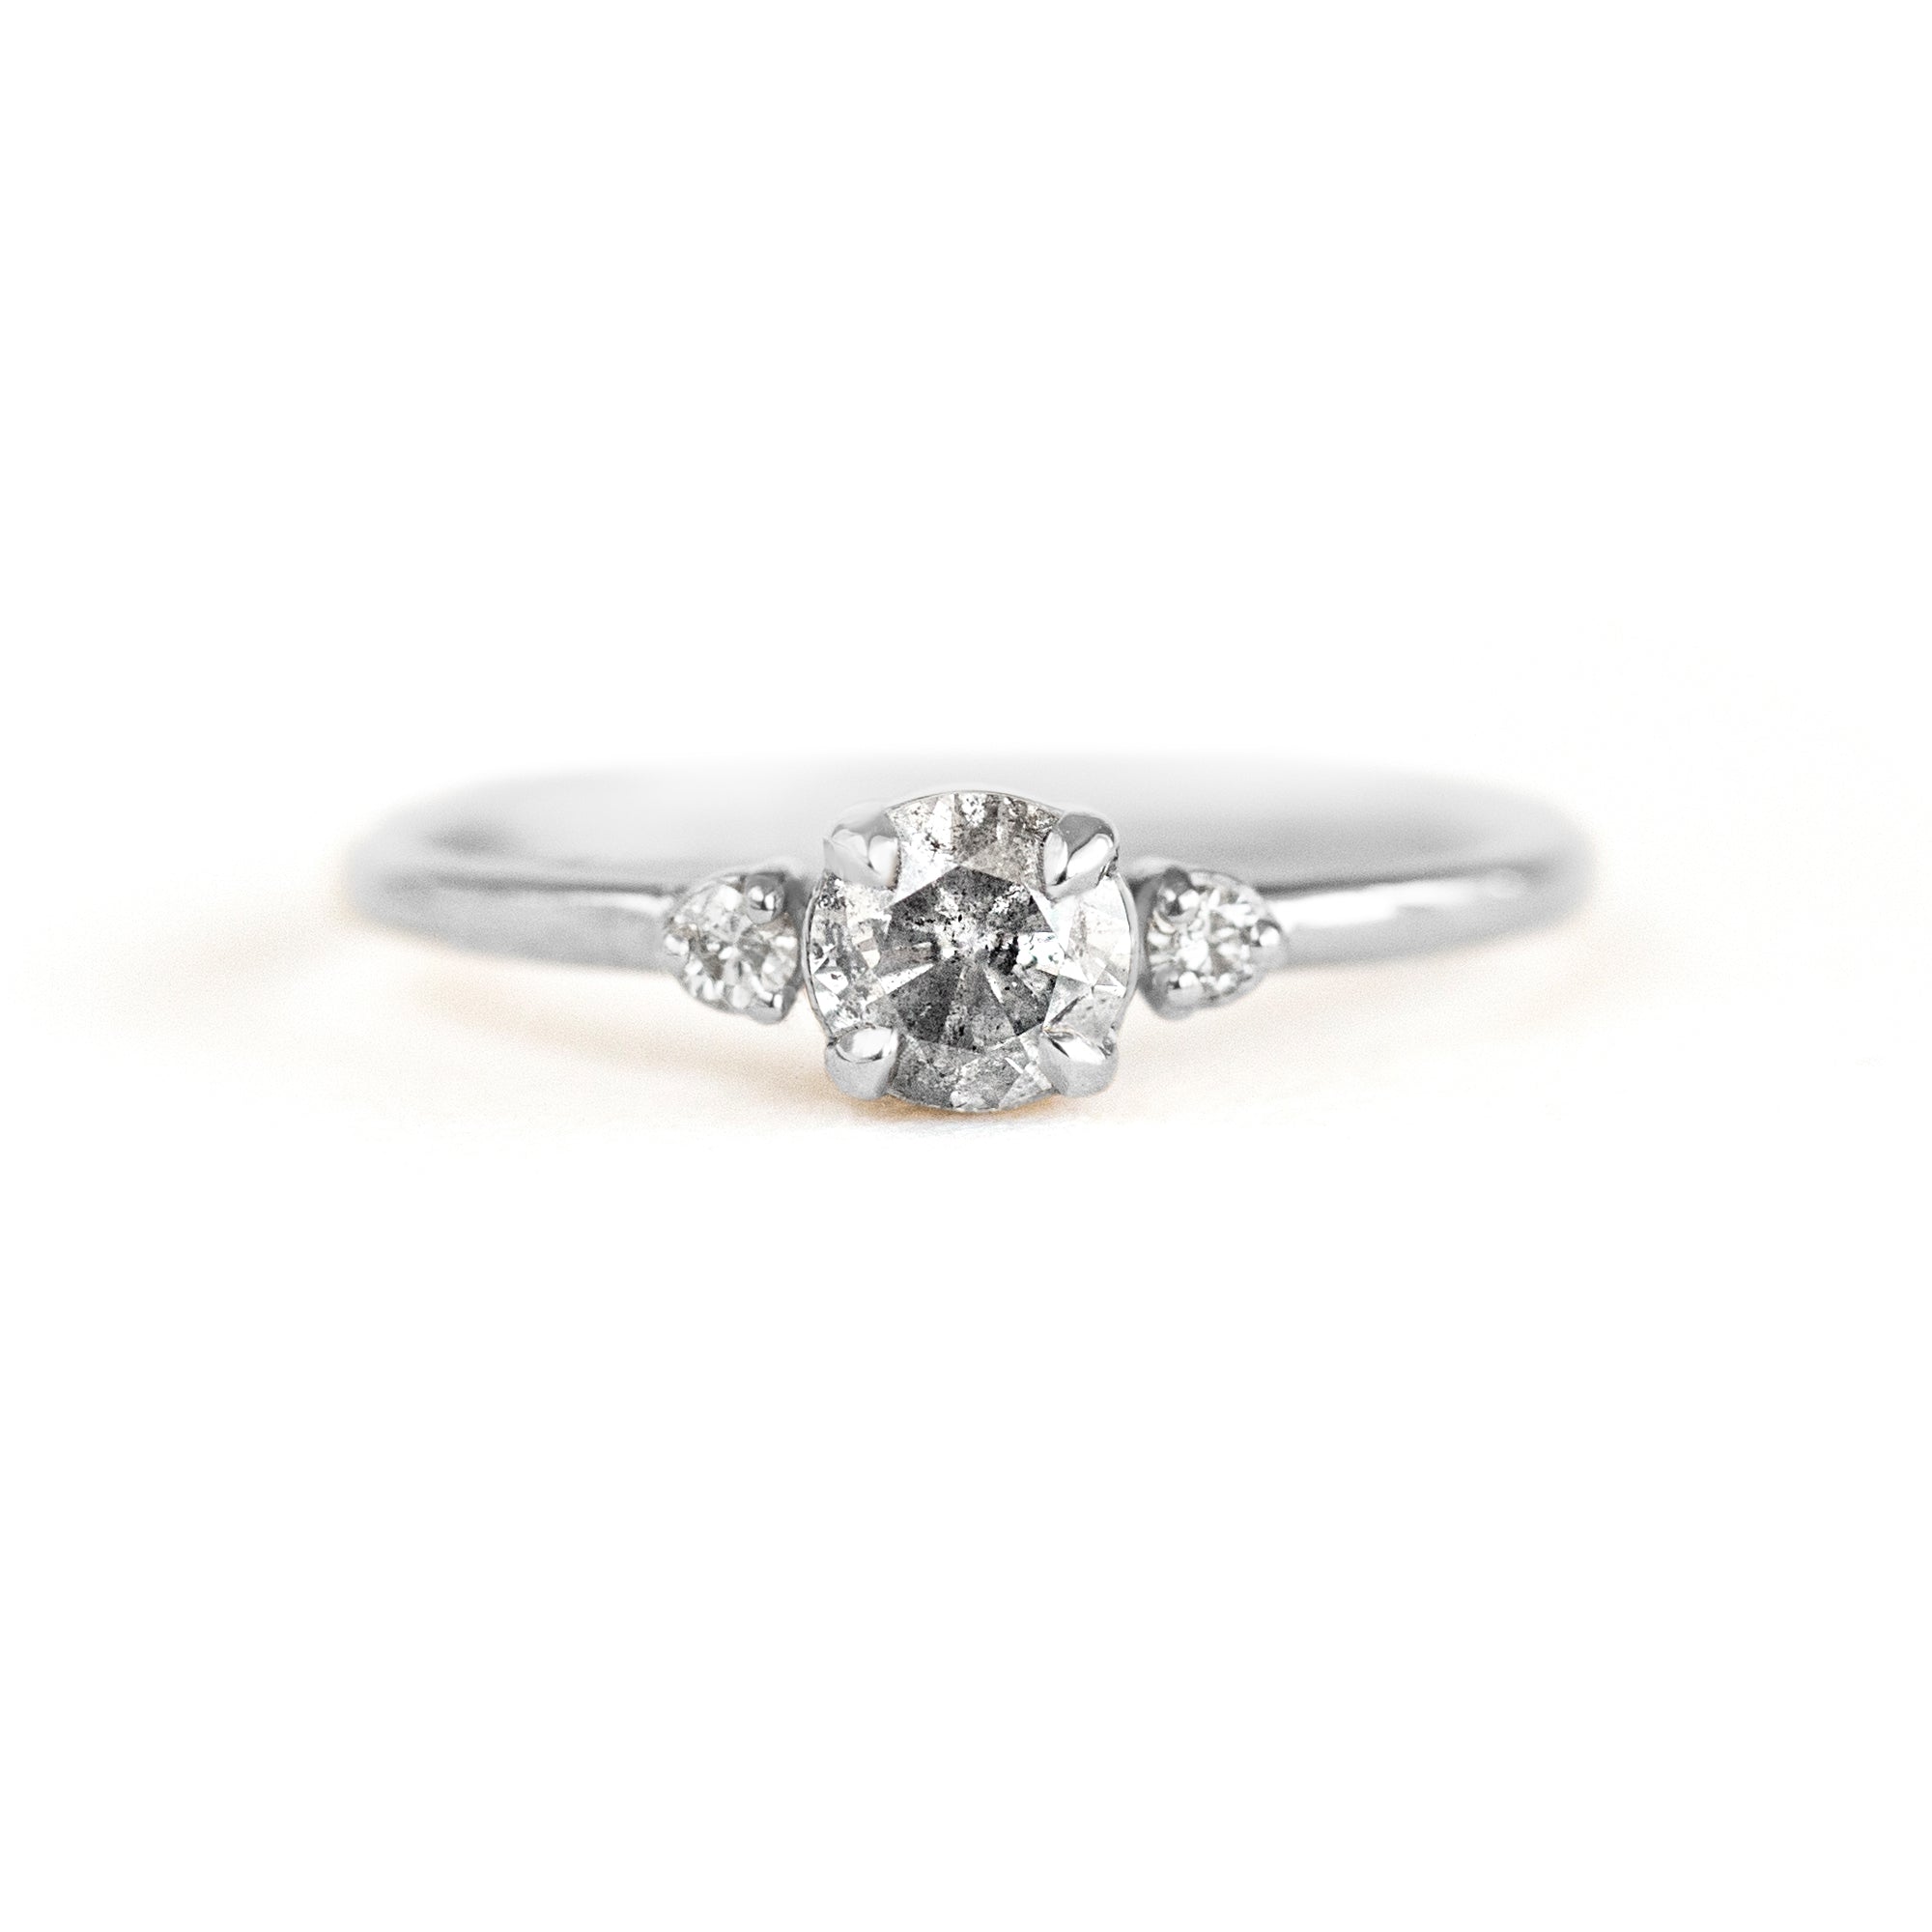 1, 2, and 3 carat diamond rings | Engagement rings, Wedding rings, Perfect engagement  ring